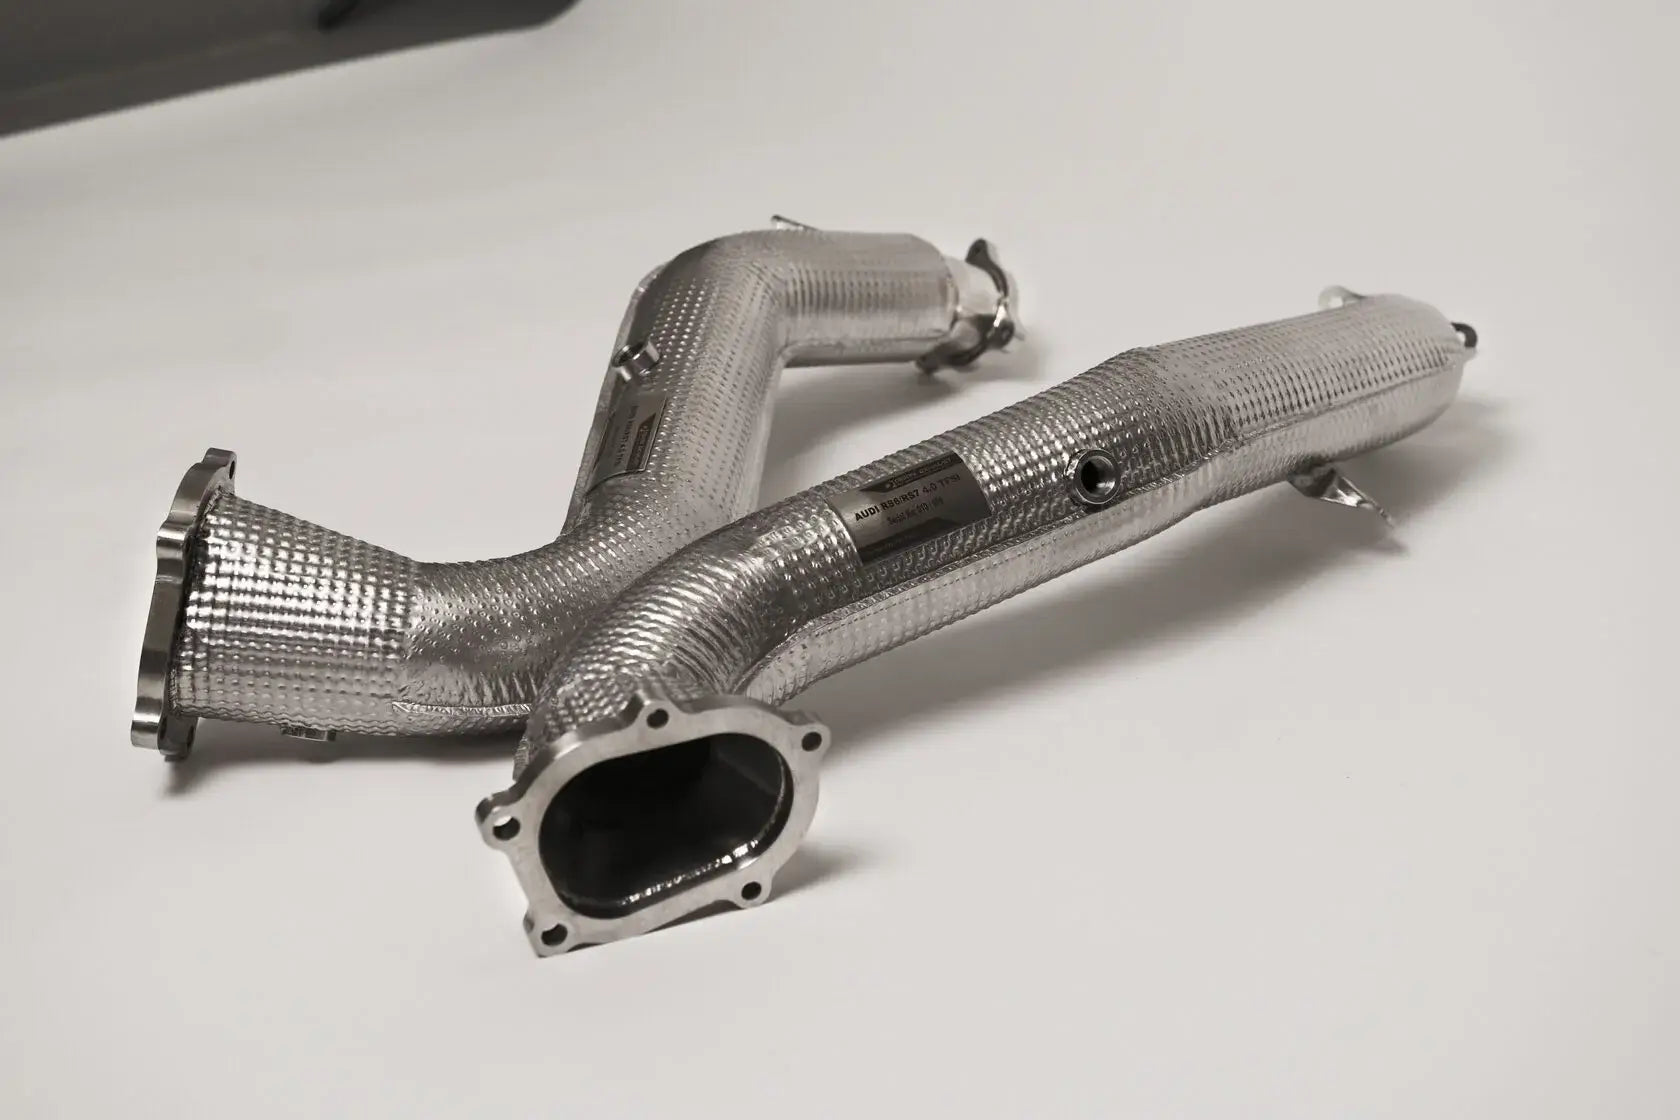 DEIKIN 10-AUDI.RS6.C7-DP Downpipe for AUDI RS6 (C7) without HeatShield Photo-4 